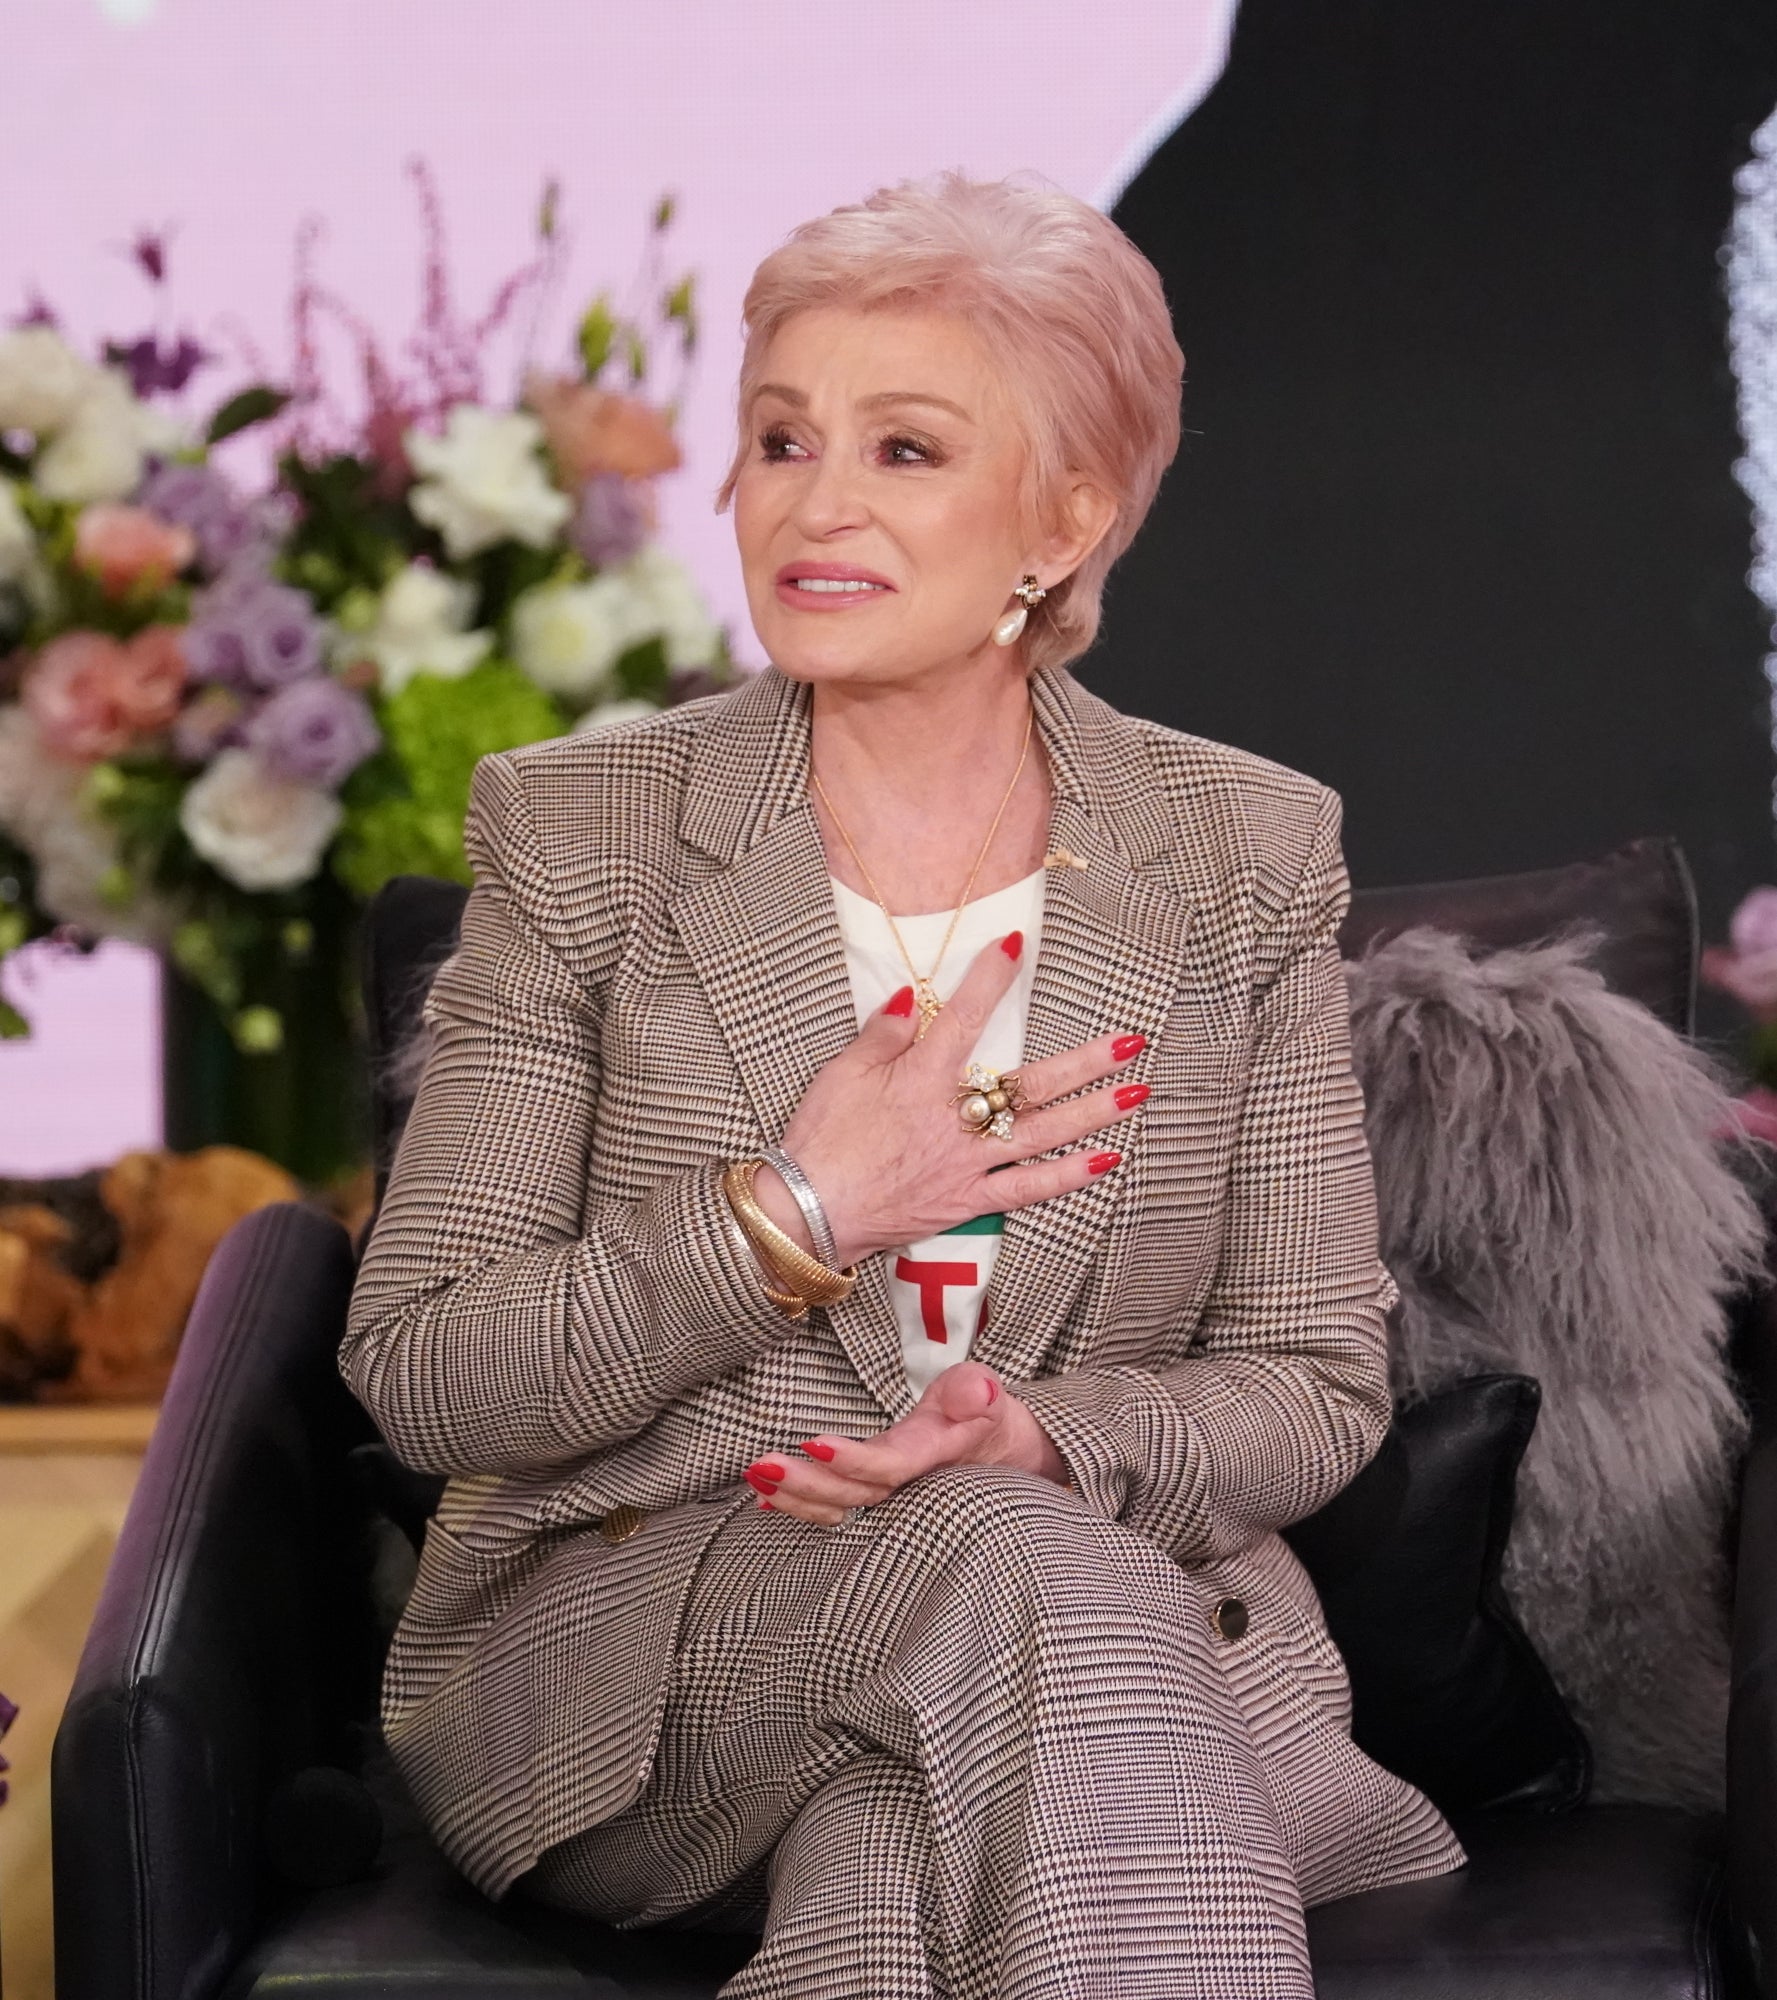 Close-up of Sharon sitting and speaking during an interview